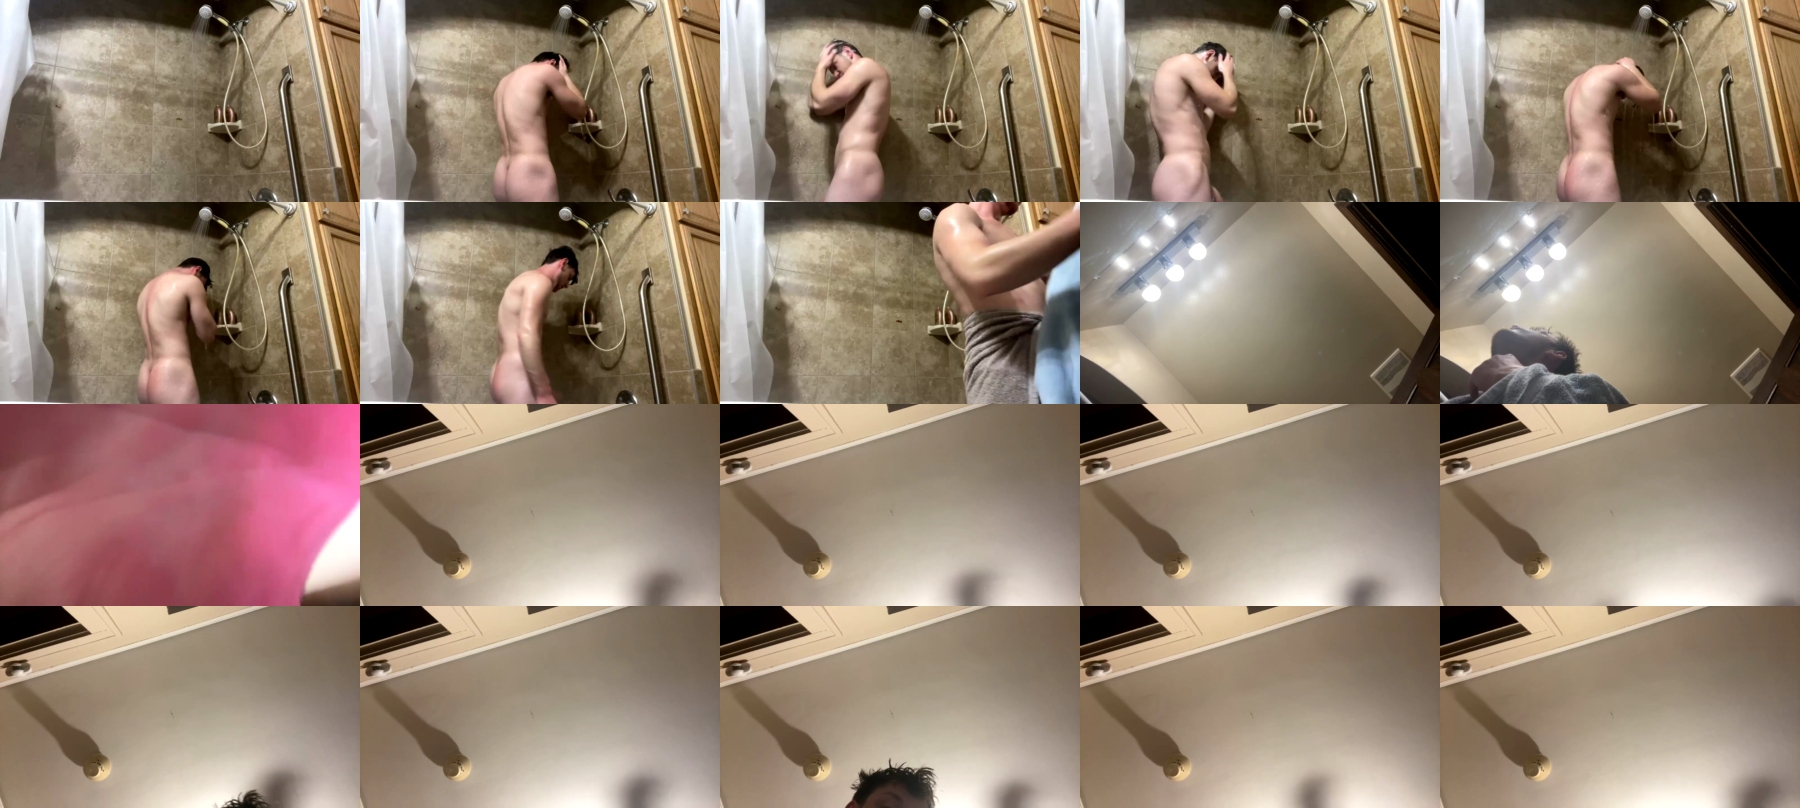 Sexylax69  08-11-2021 Male Recorded